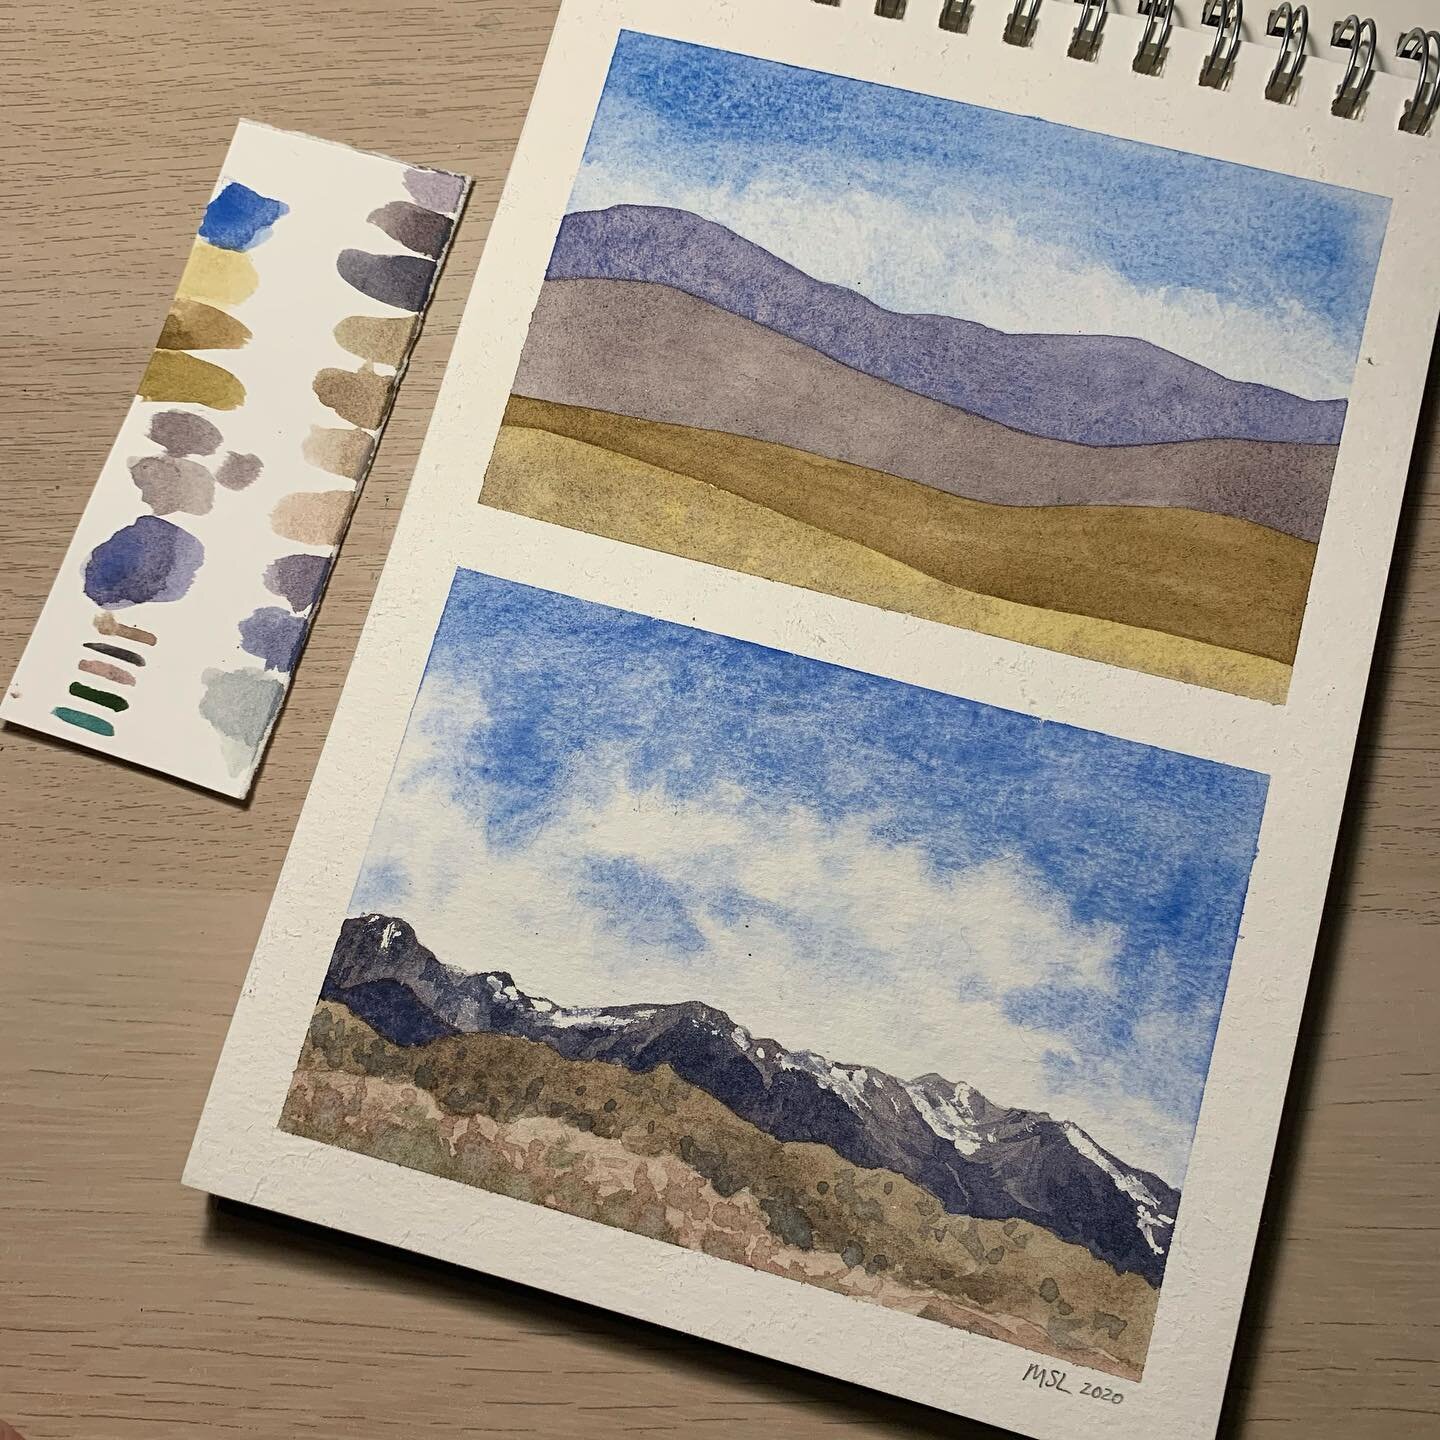 Results from my upcoming demonstration video, &ldquo;Painting Mountains,&rdquo; for @thefosterpaloalto coming out on November 3rd!
.
.
.
.
.
.
#mountains #paintingmountains #landscape #painting #watercolor #watercolour #winsorandnewton #thefoster #ar